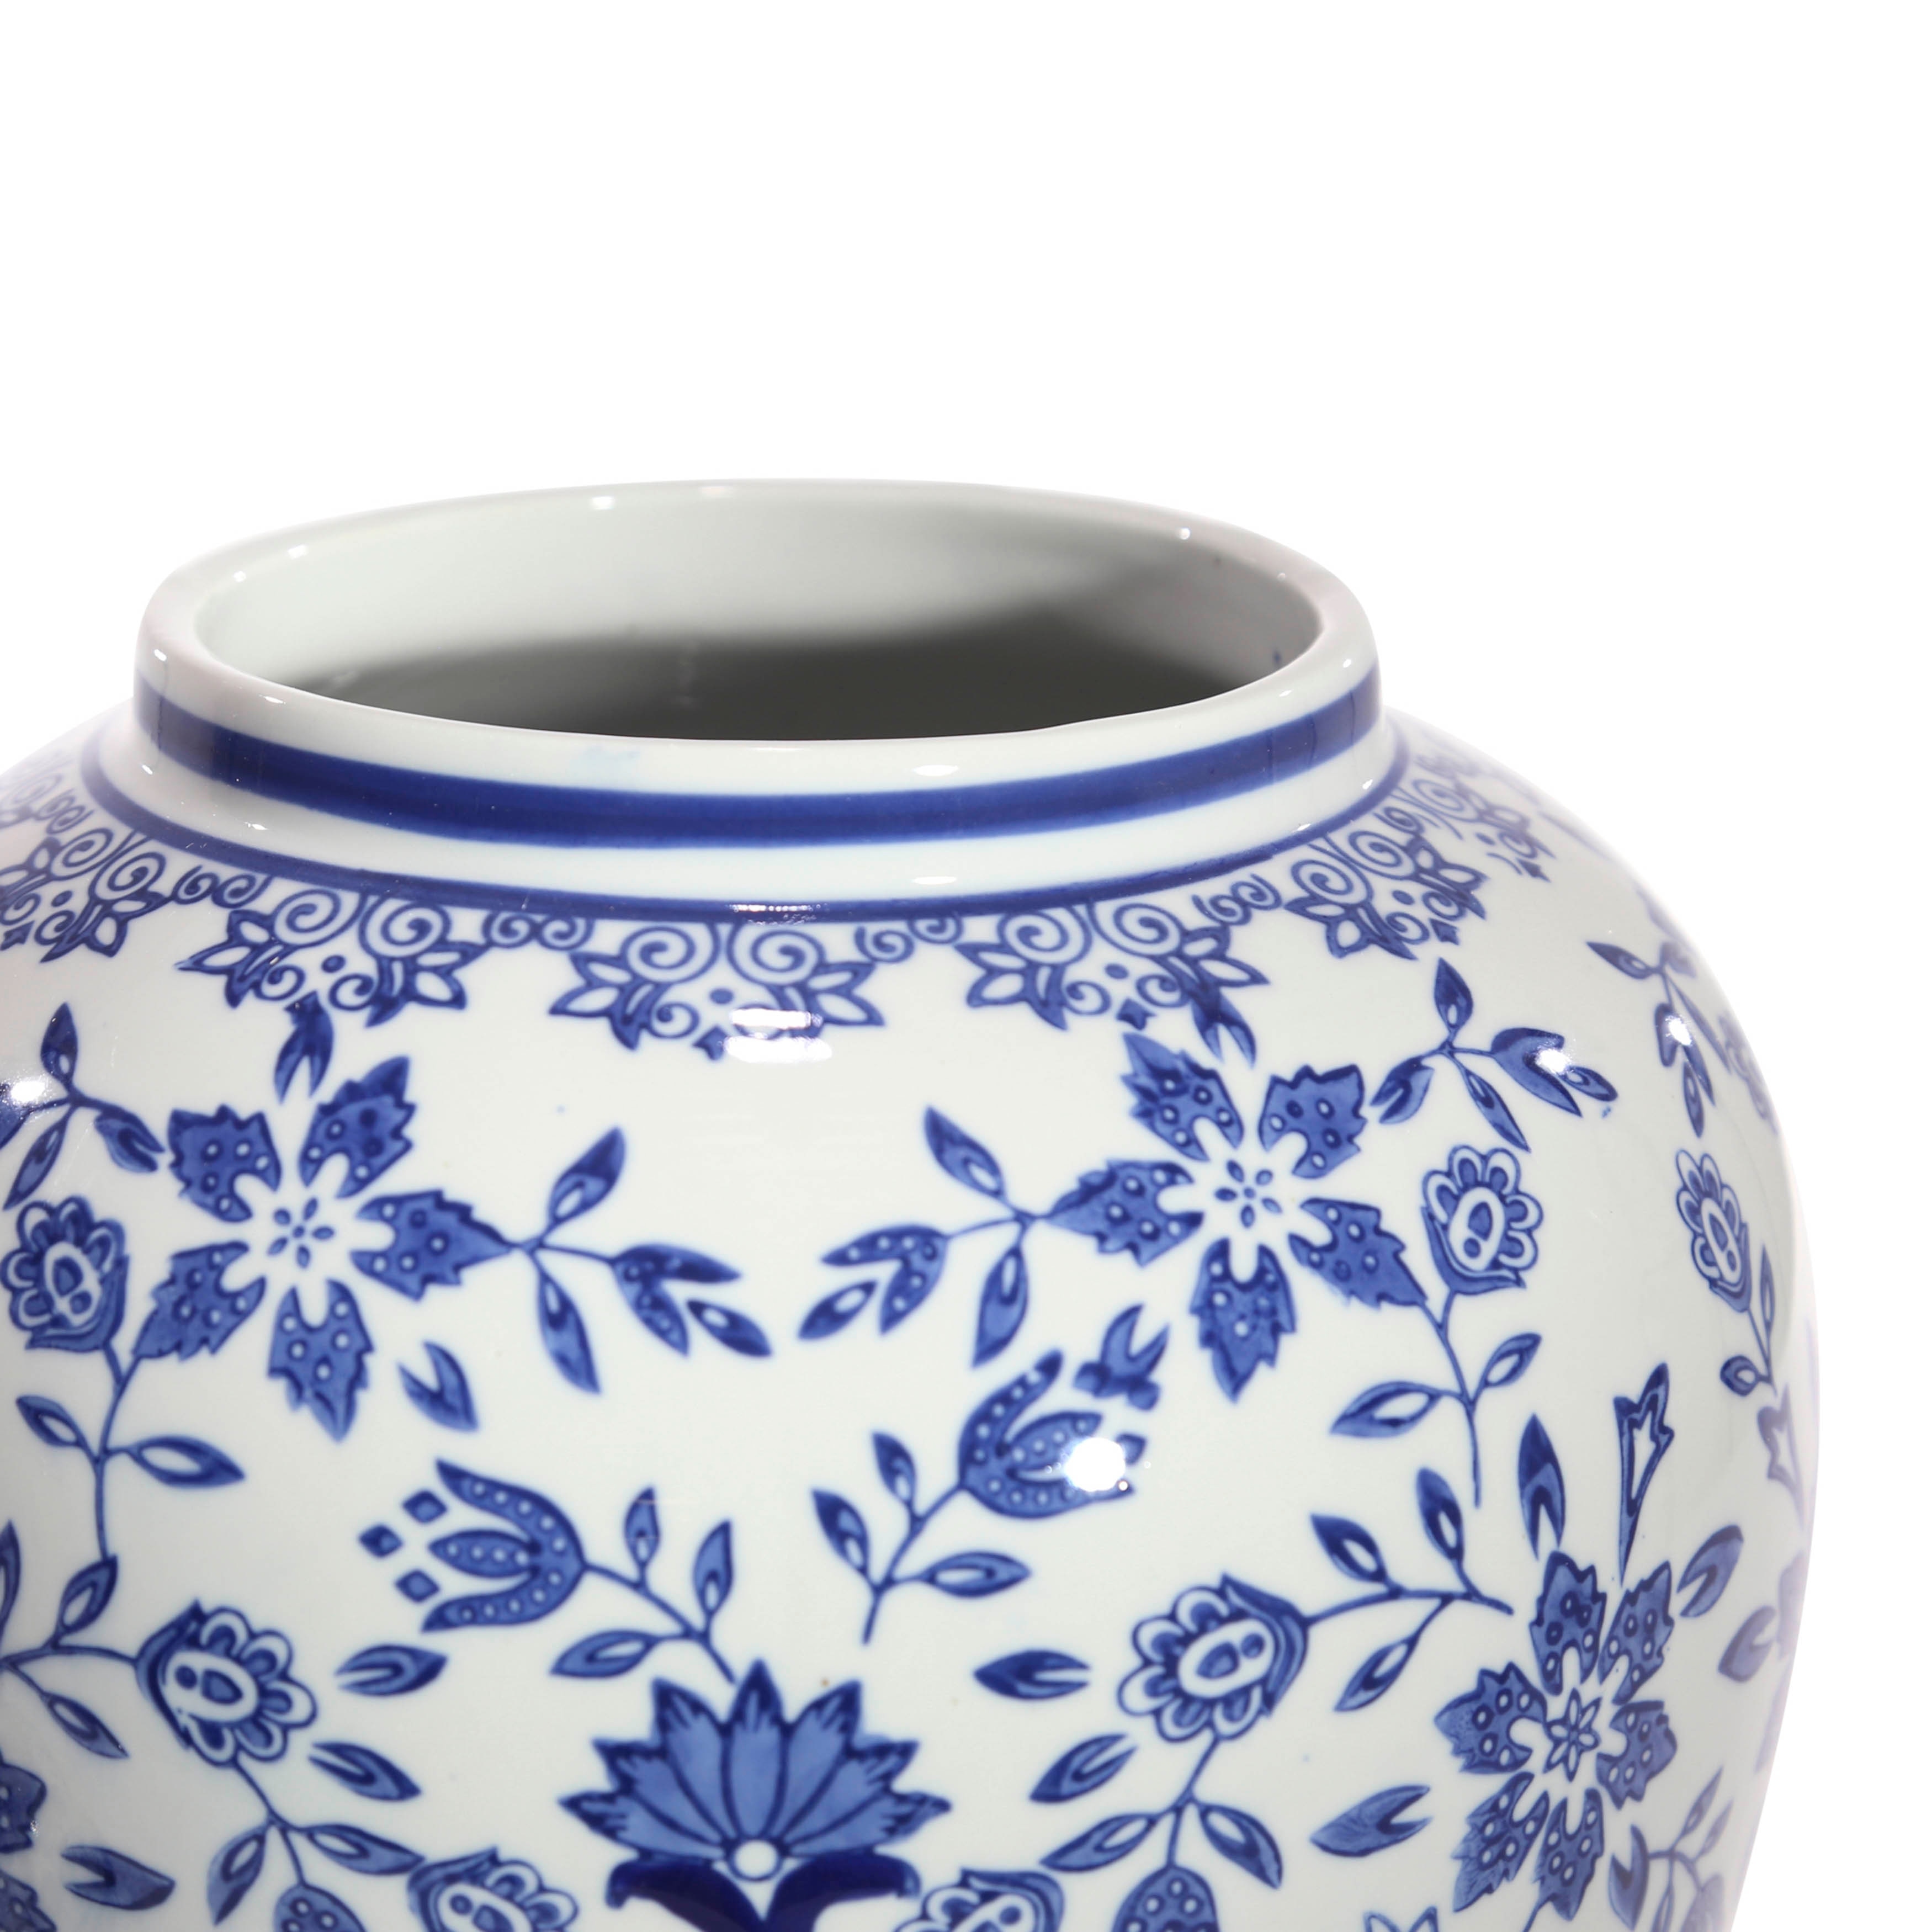 18" Ceramic Temple Jar with Lid Contemporary Vintage Style Blue and White Chinoiserie Floral Design Home or Office